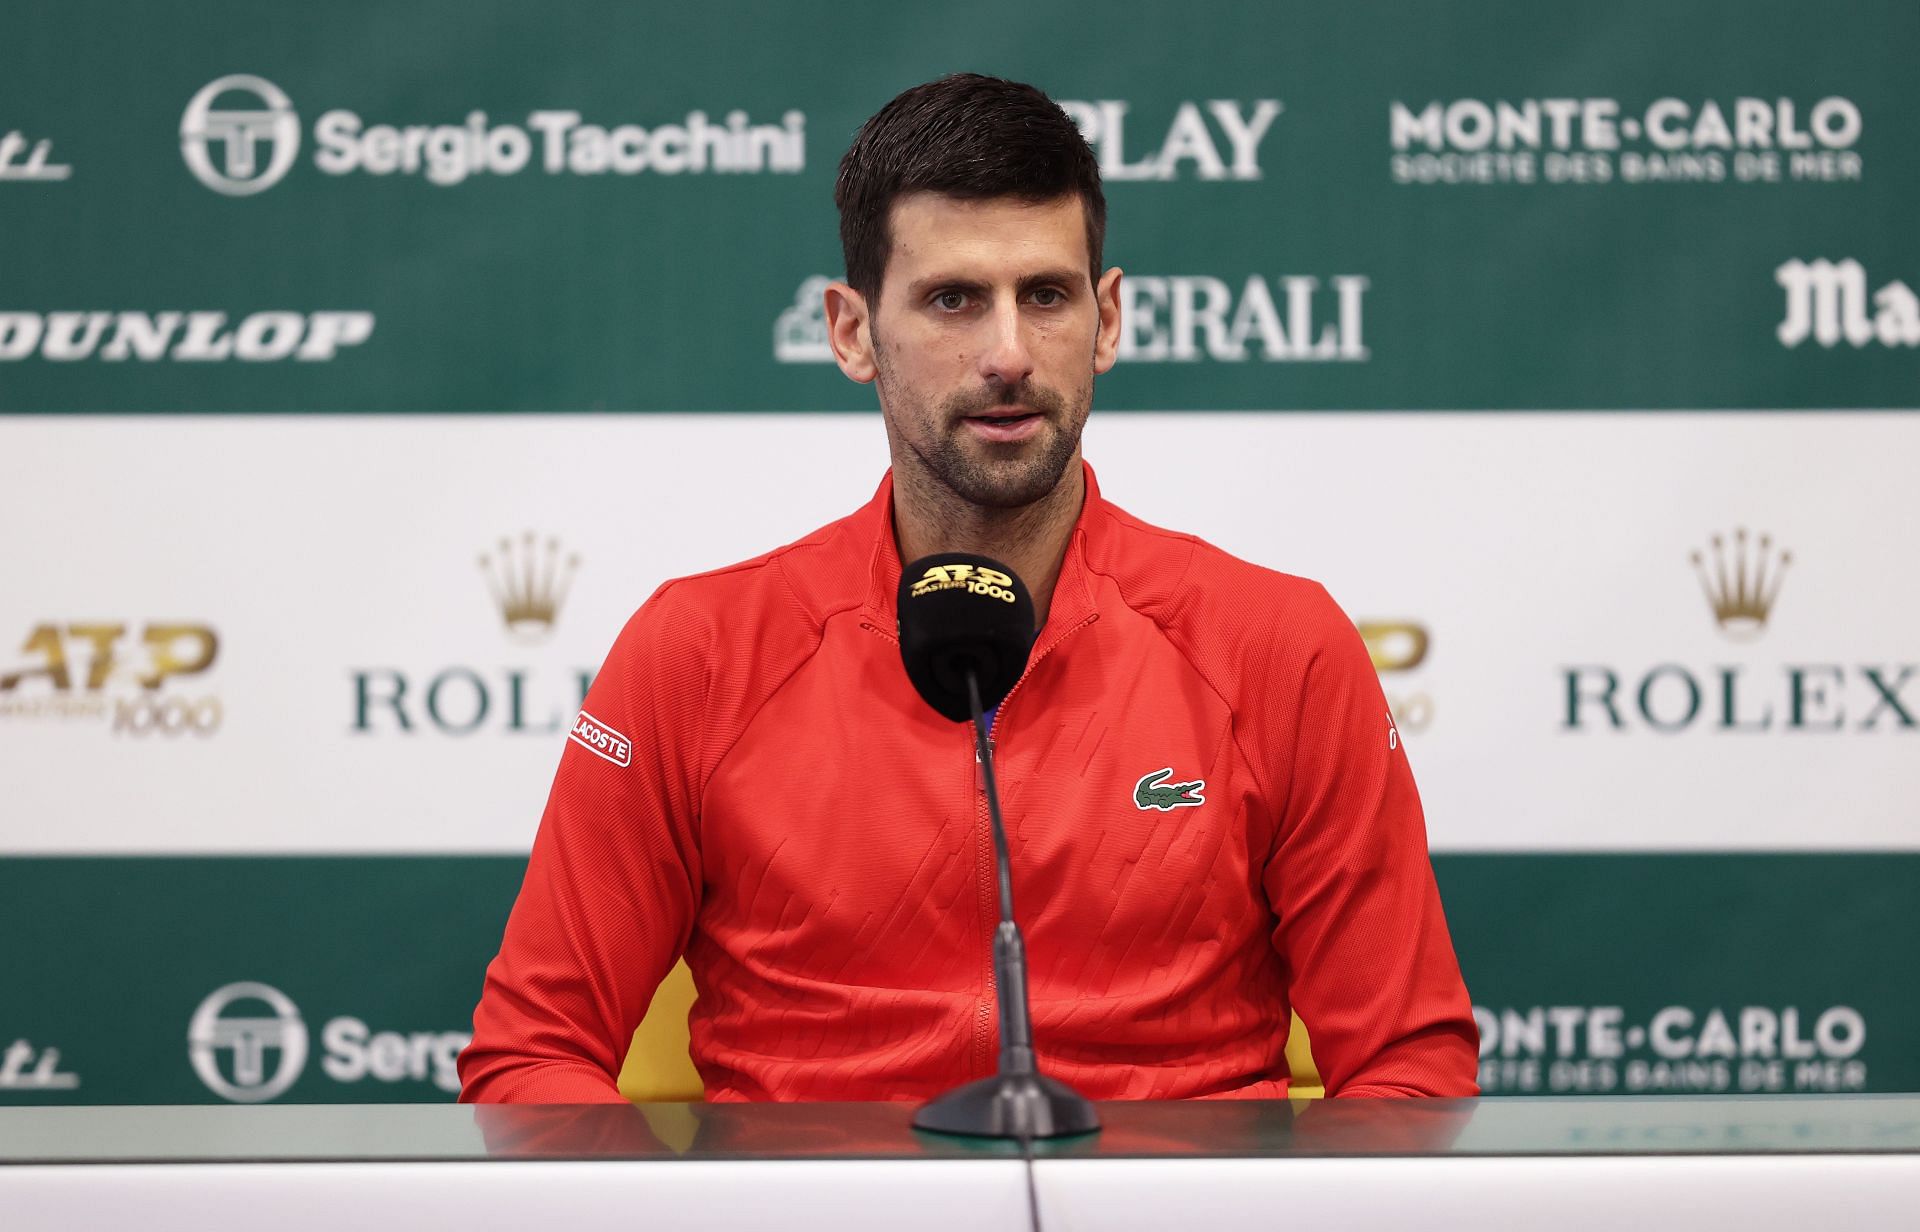 Novak Djokovic at a press conference ahead of the 2022 Rolex Monte-Carlo Masters